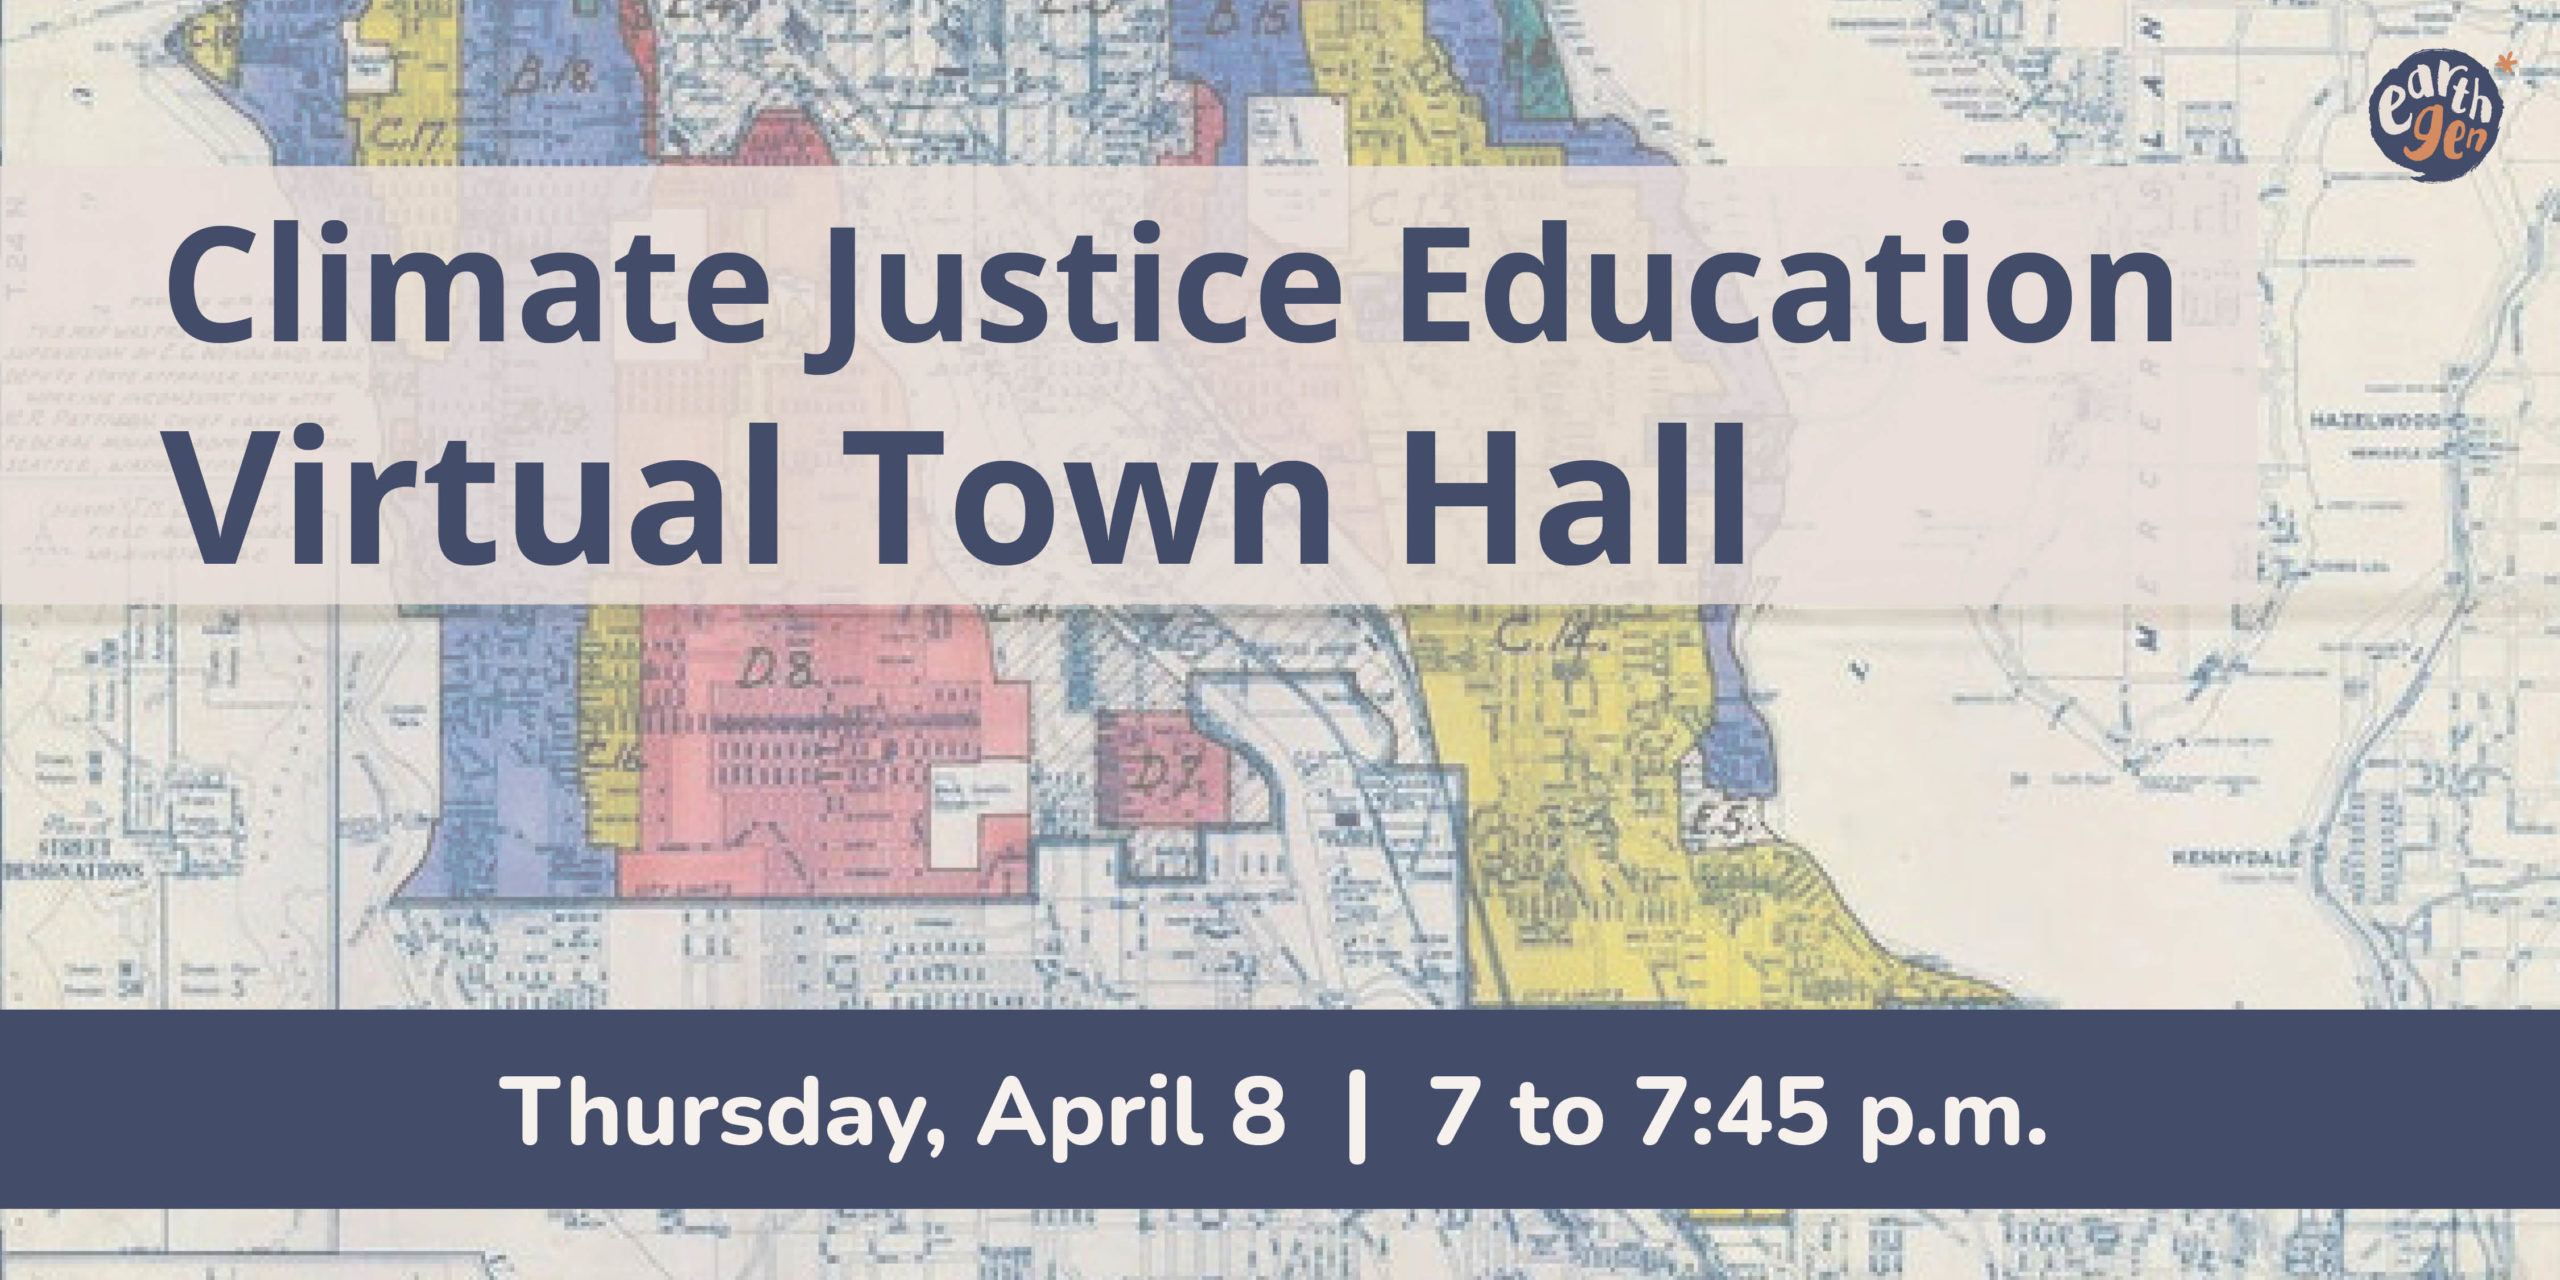 Climate Justice Education Virtual Town Hall | Thursday April 8 | 7 to 7:45 p.m.